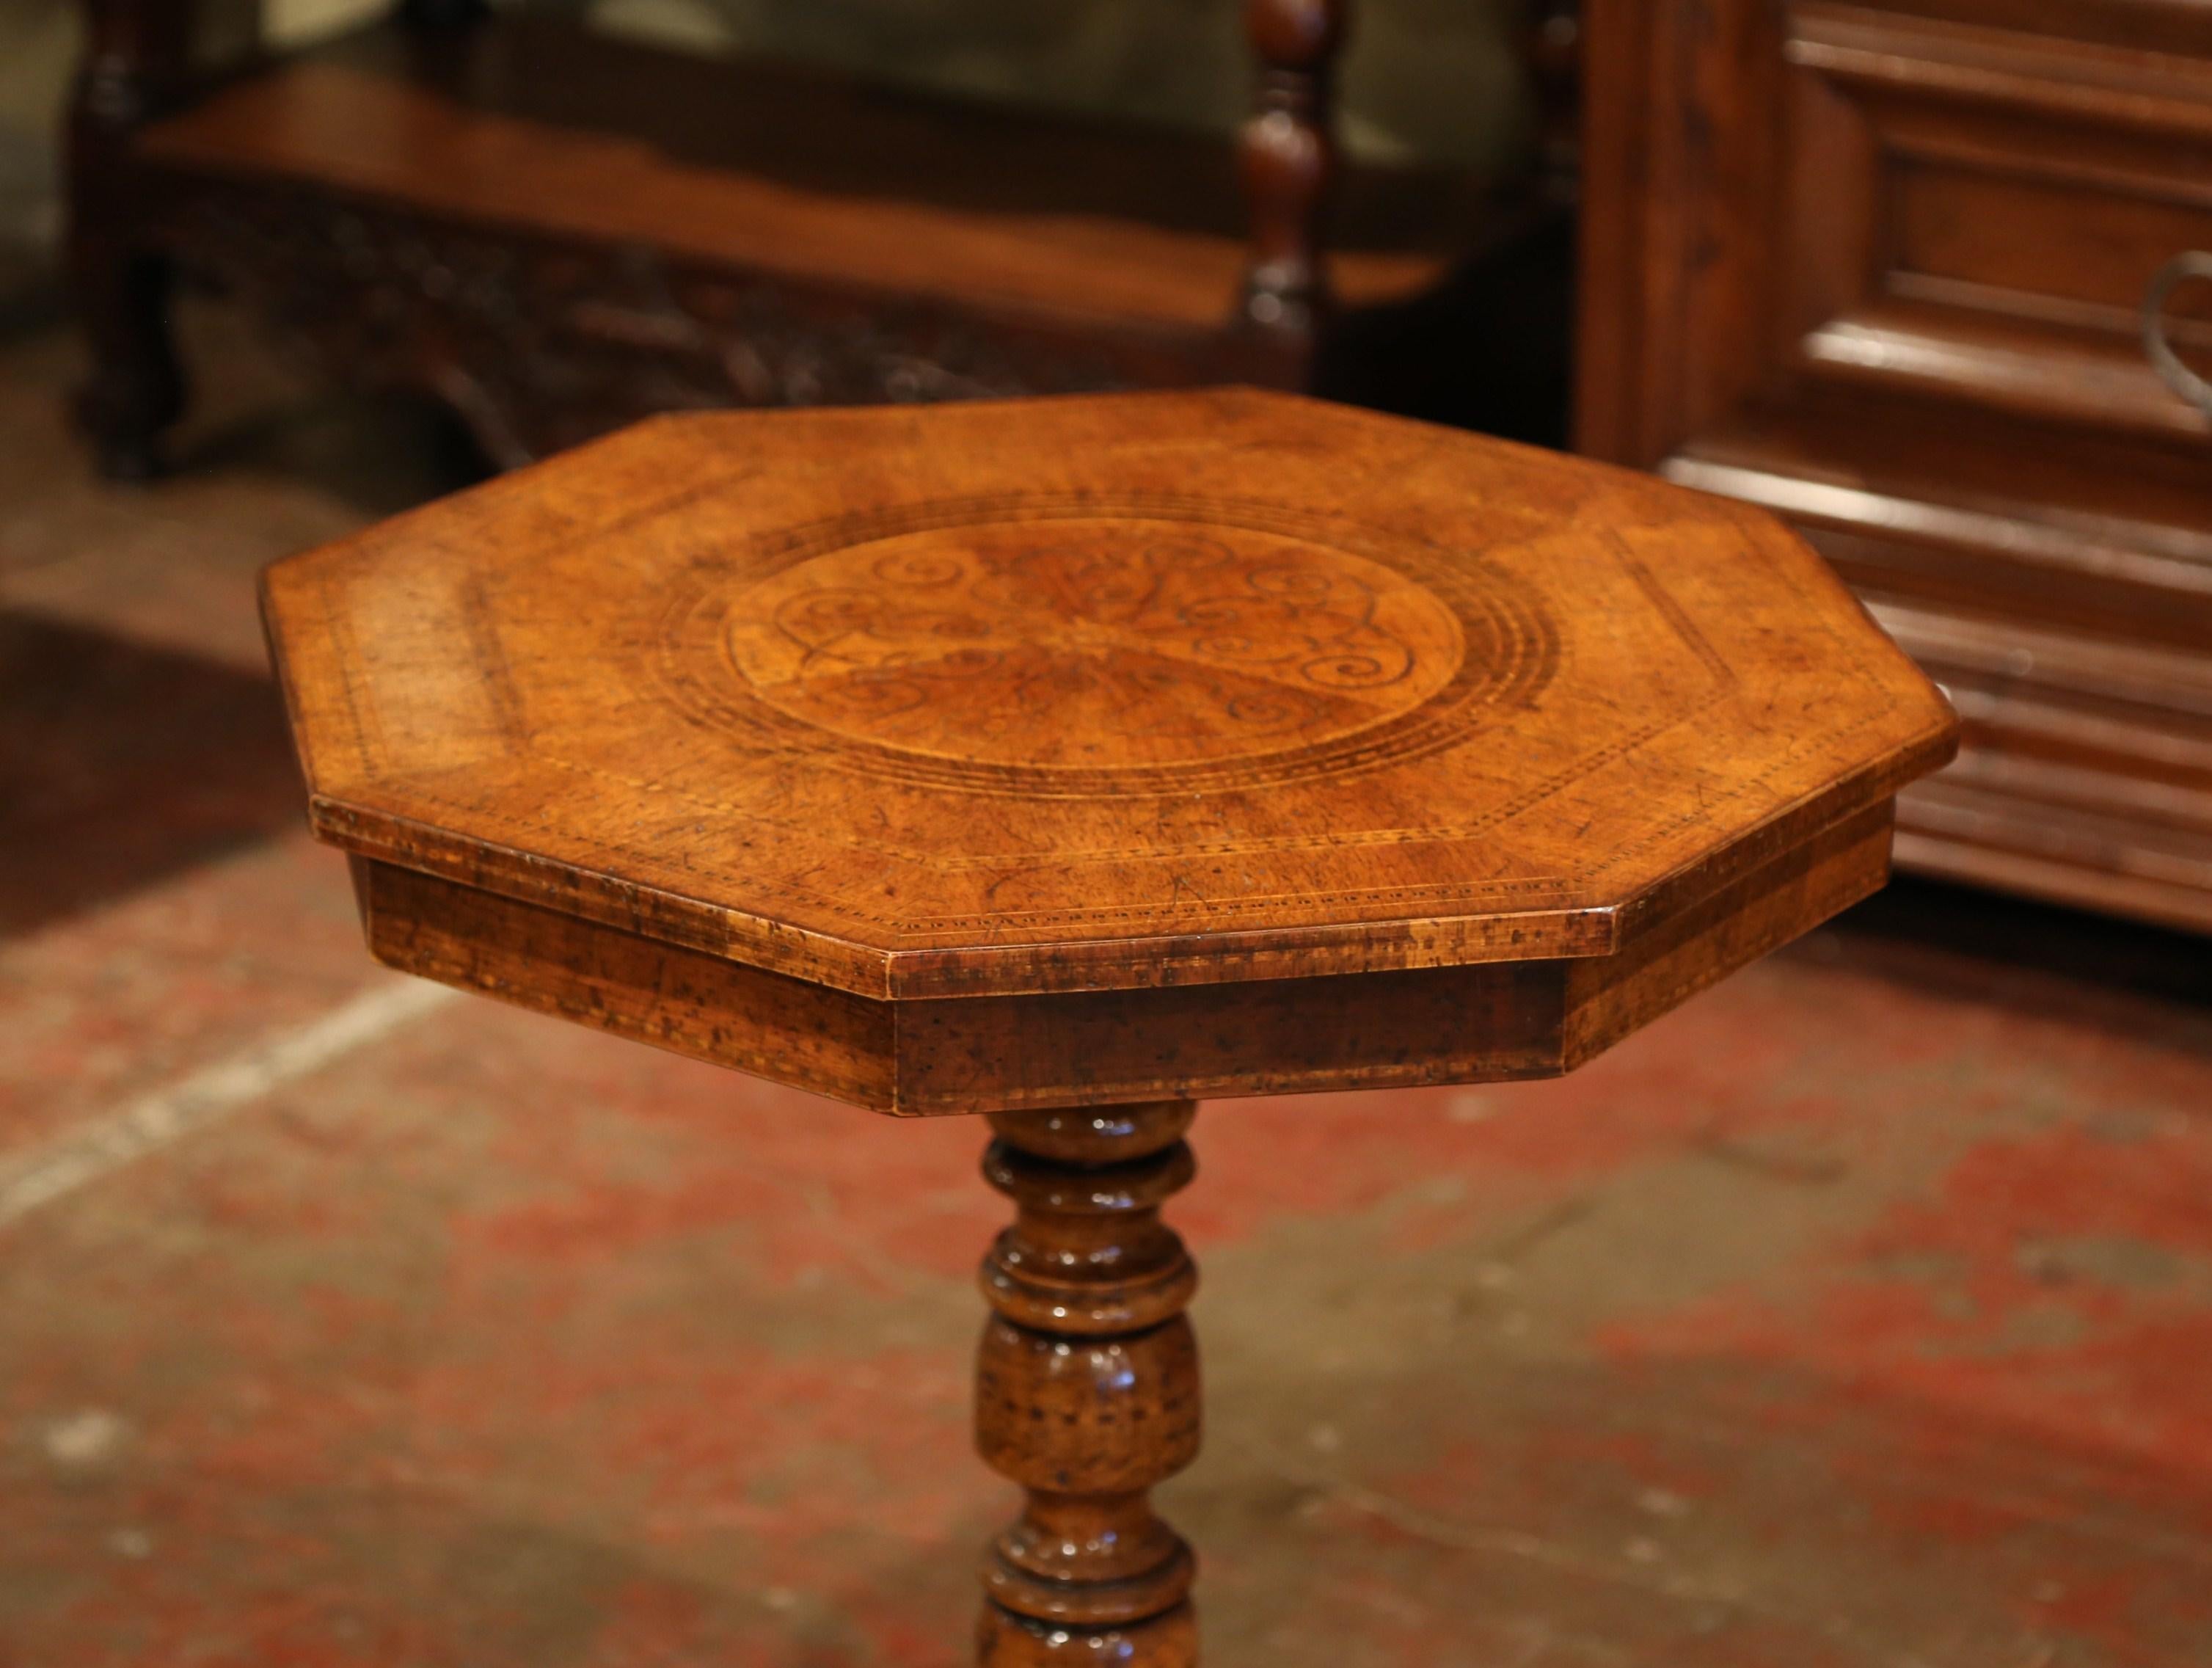 Incorporate extra surface space into your living room with this French fruit wood gueridon table. The octagonal gueridon could easily be placed next to a sofa or between two armchairs given its height and versatile shape. Standing on a carved base